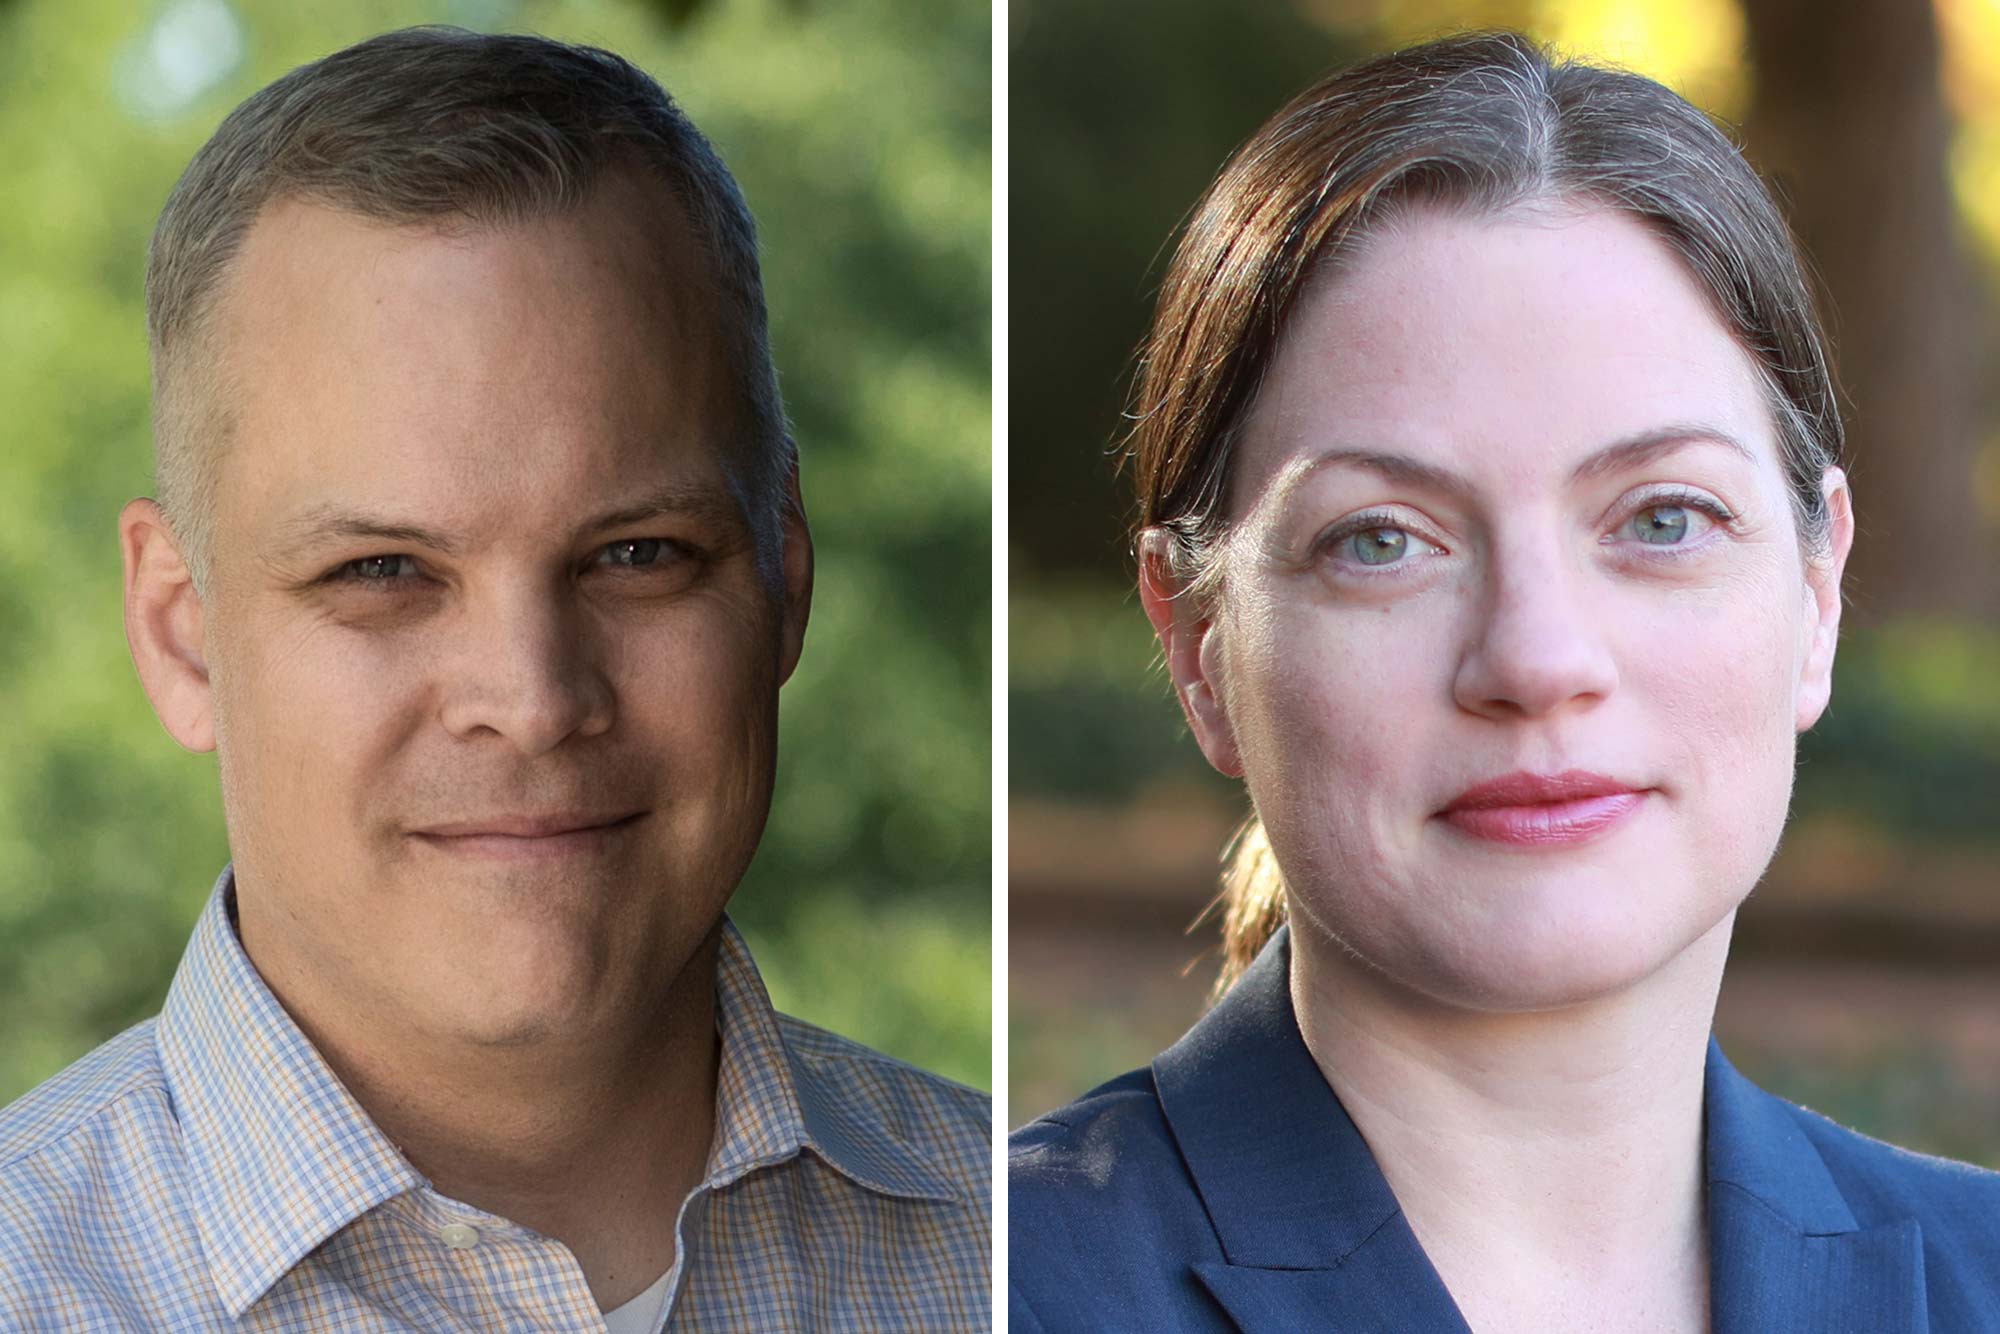 University of Virginia cybersecurity experts Ryan Wright and Kristen Eichensehr.